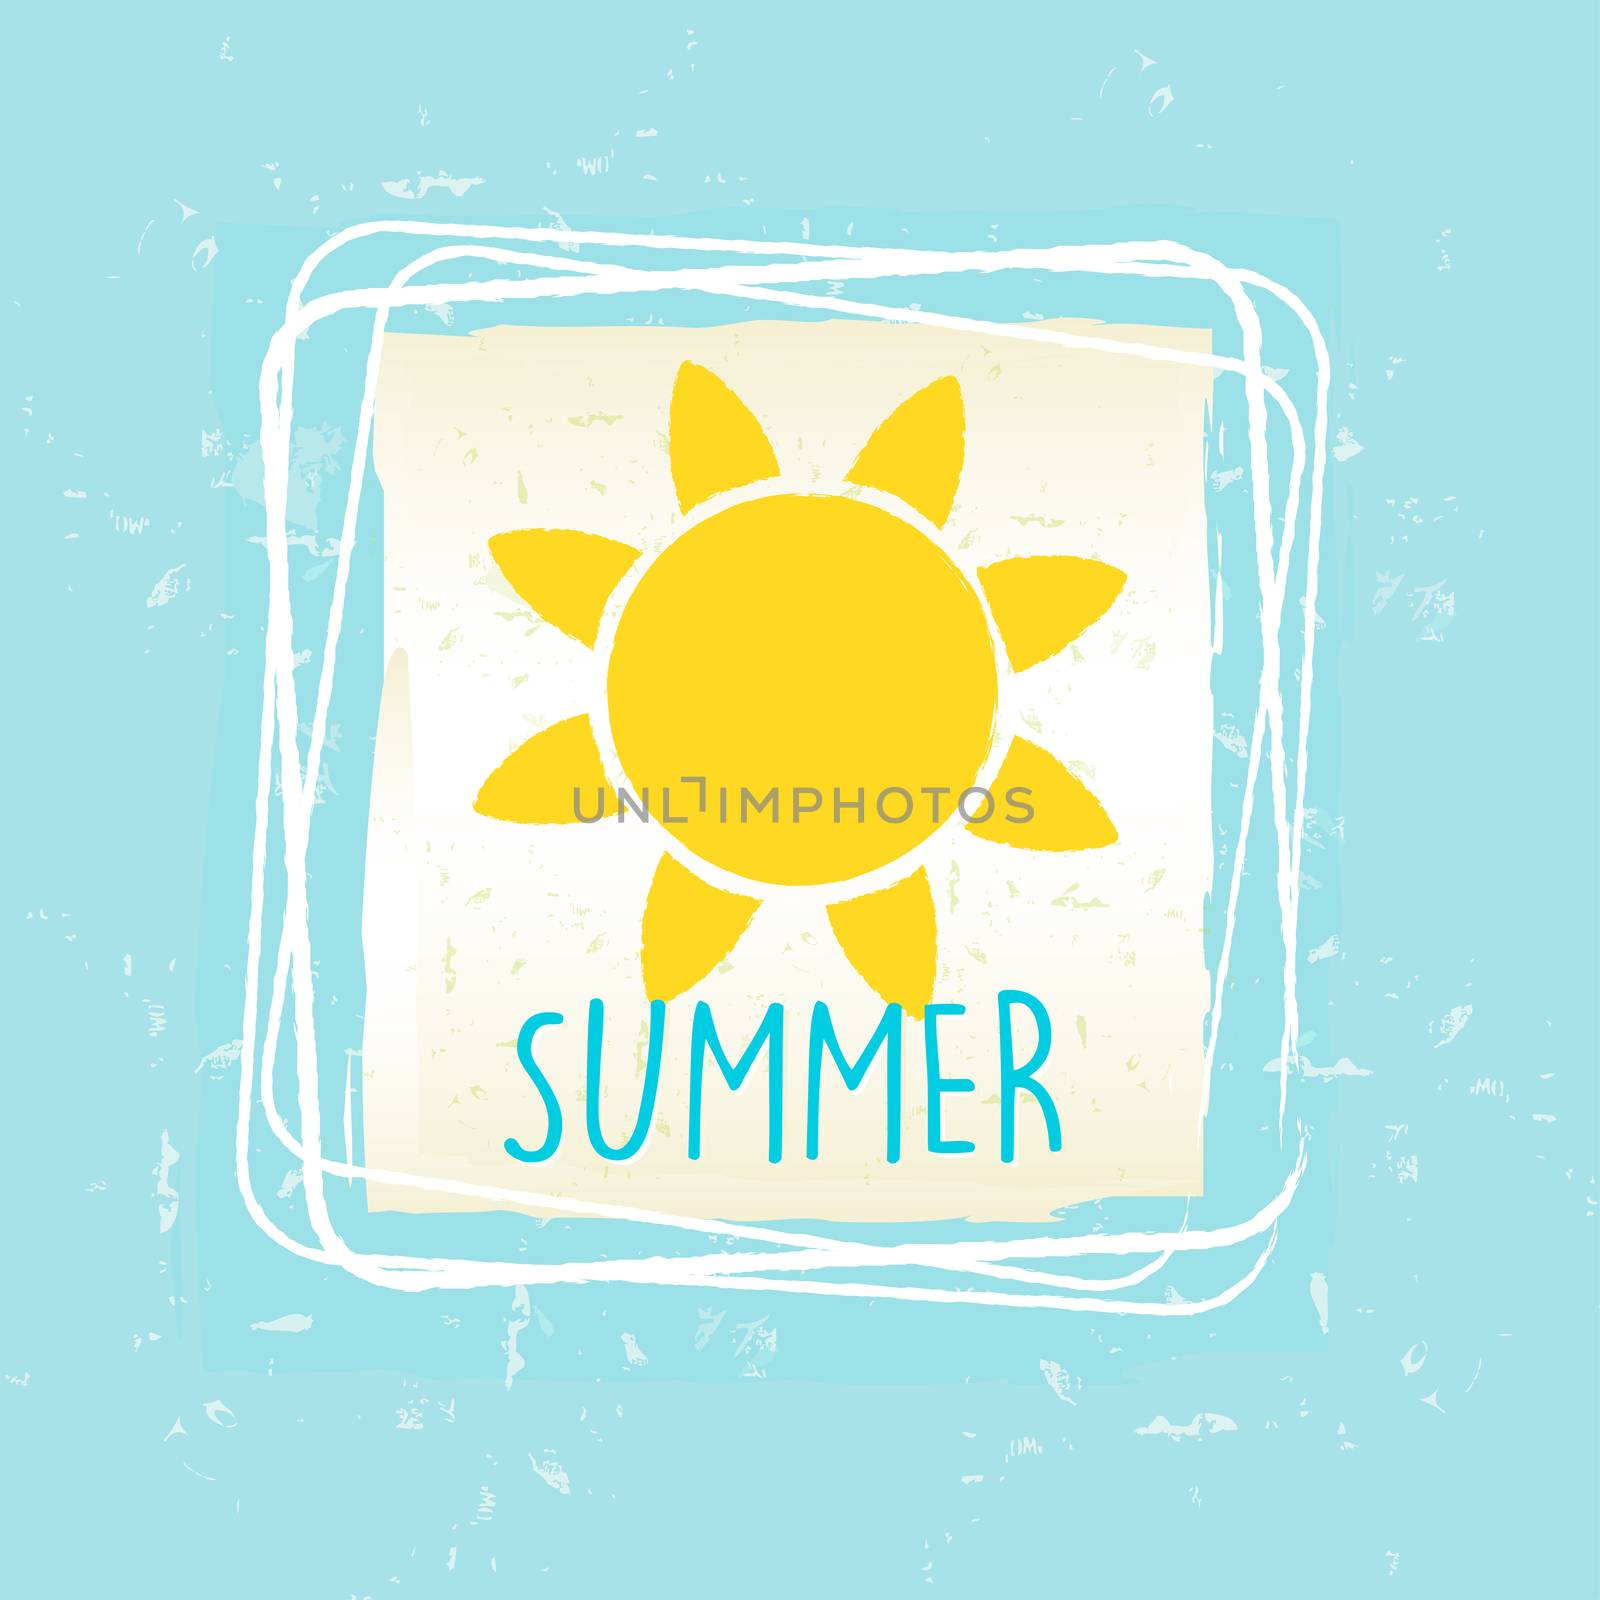 summer with sun sign in frame over blue old paper background by marinini